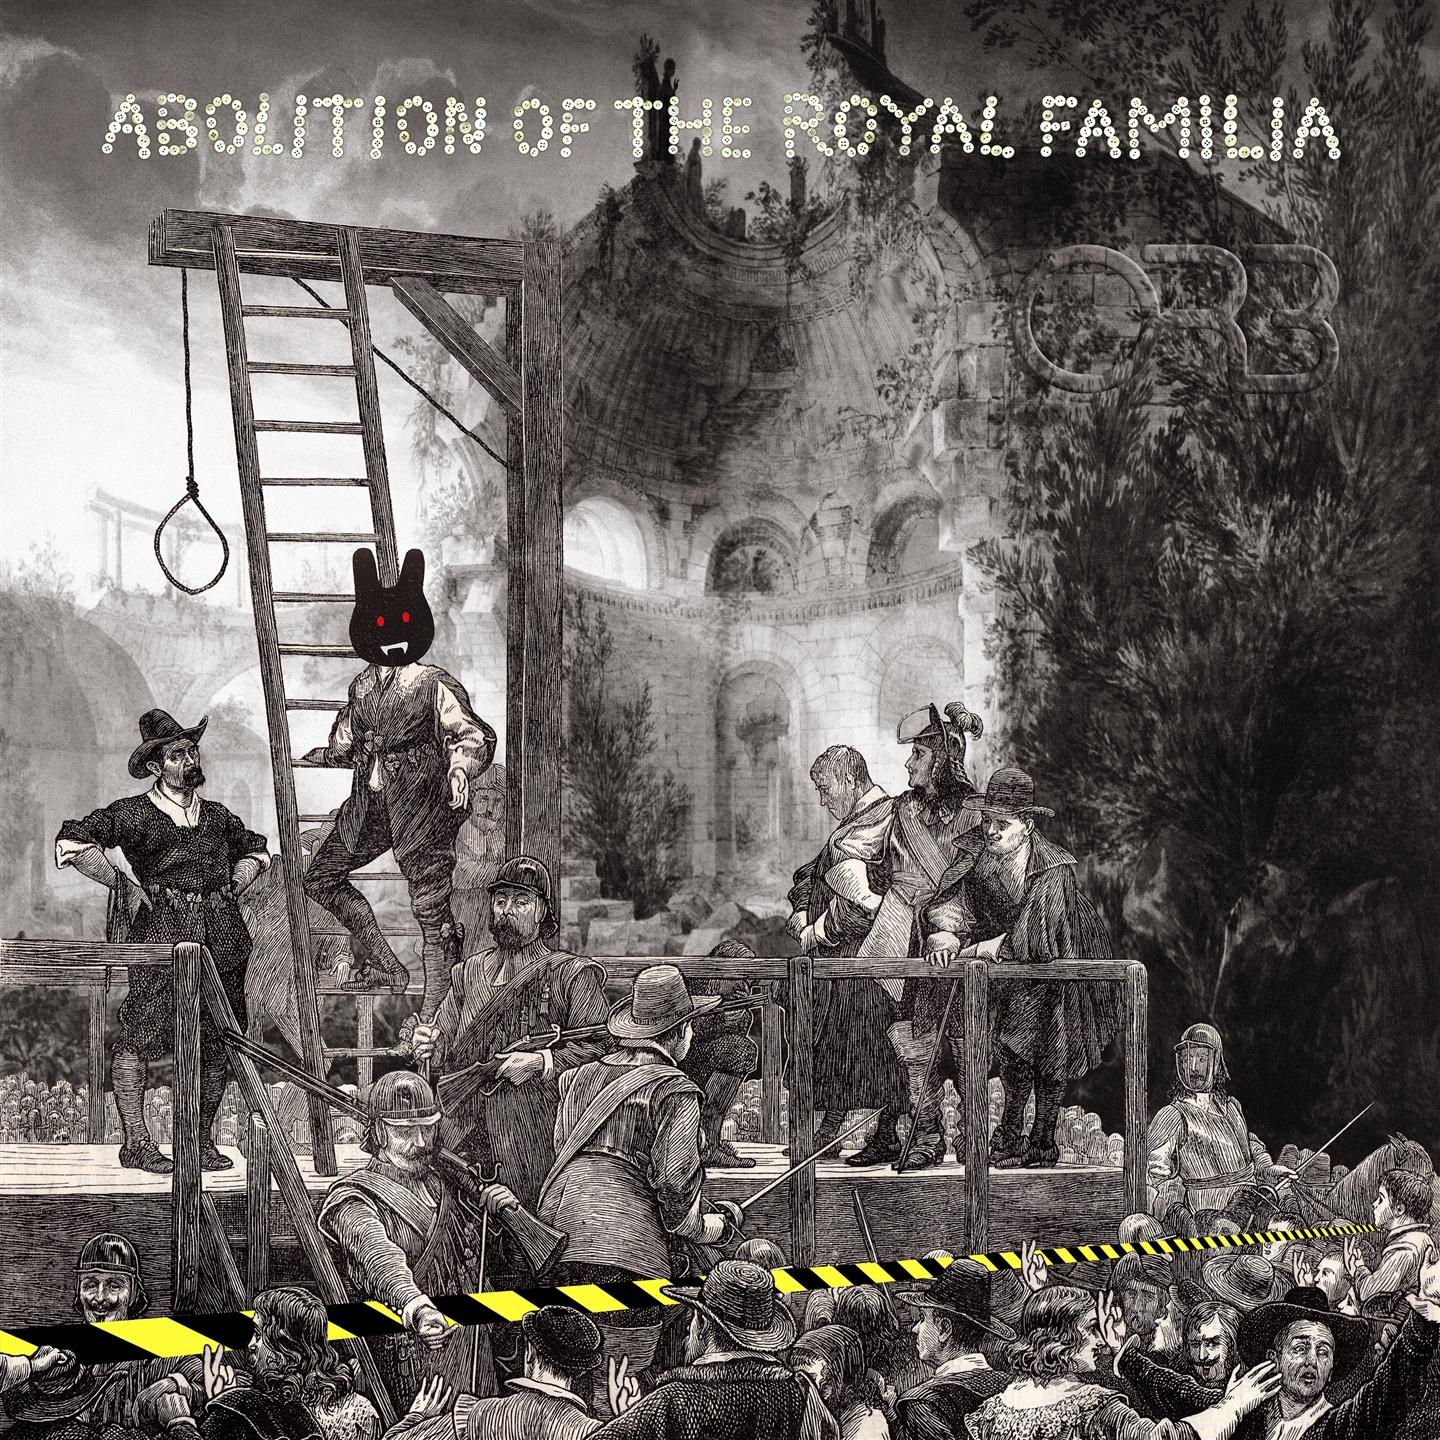 THE ABOLITION OF THE ROYAL FAMILIA